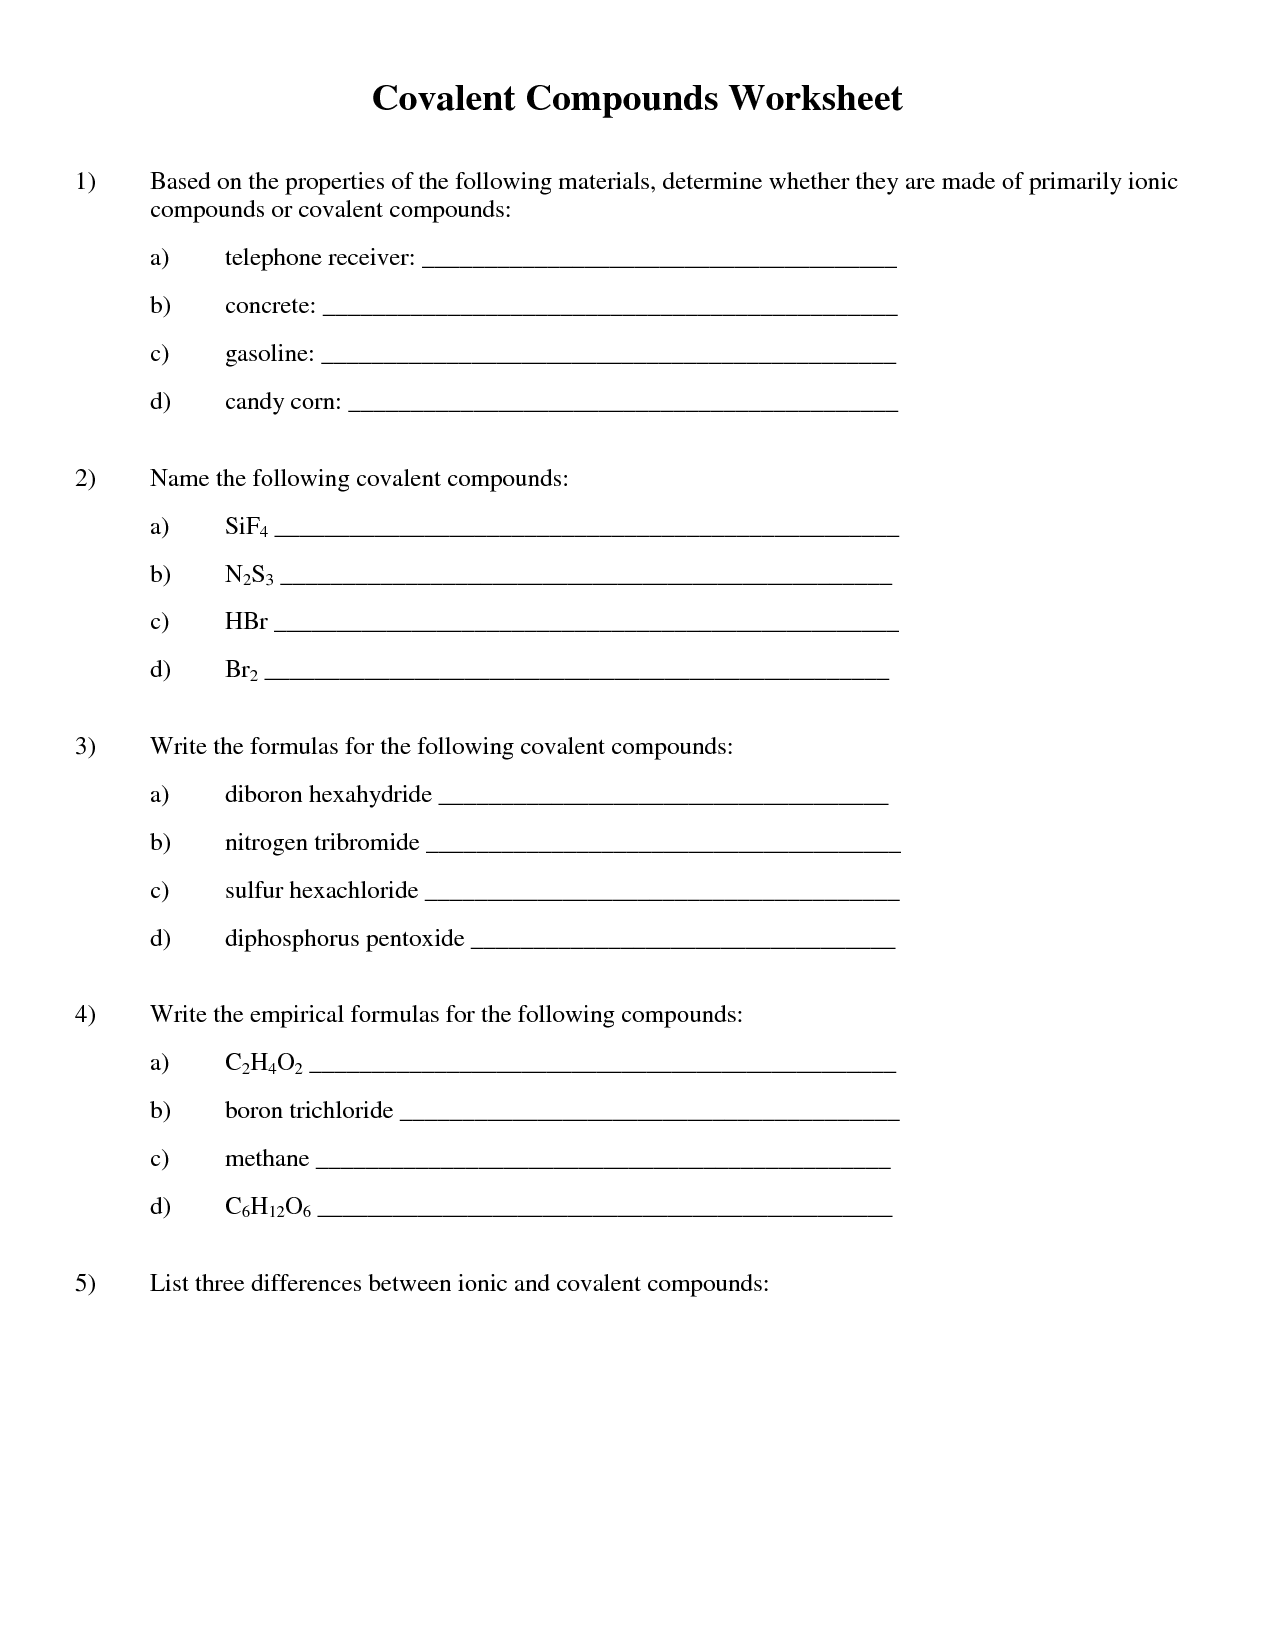 11-best-images-of-ionic-and-covalent-bonding-practice-worksheet-answers-ionic-and-covalent